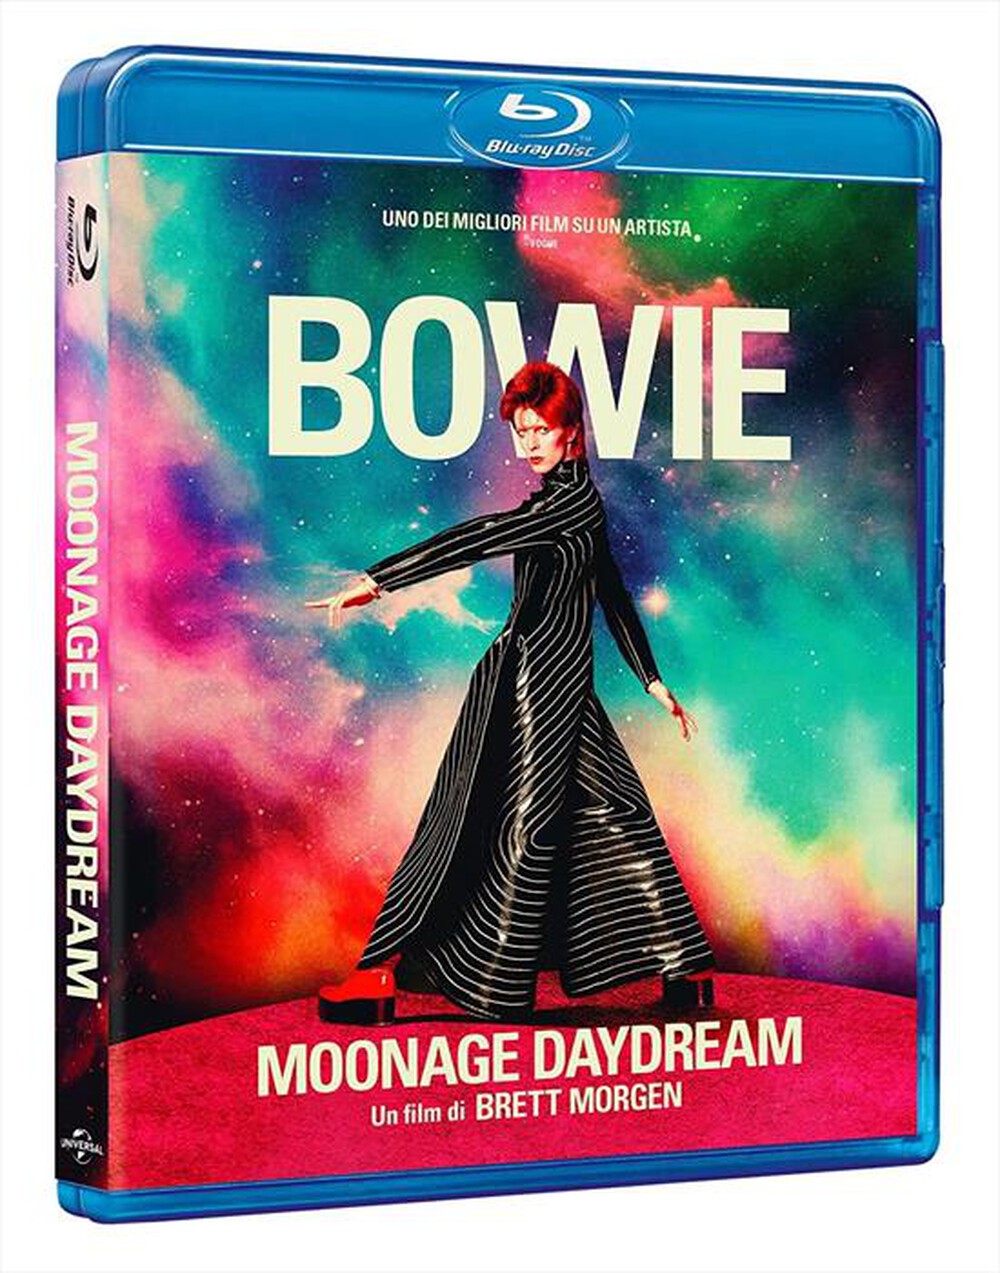 "UNIVERSAL PICTURES - Moonage Daydream"